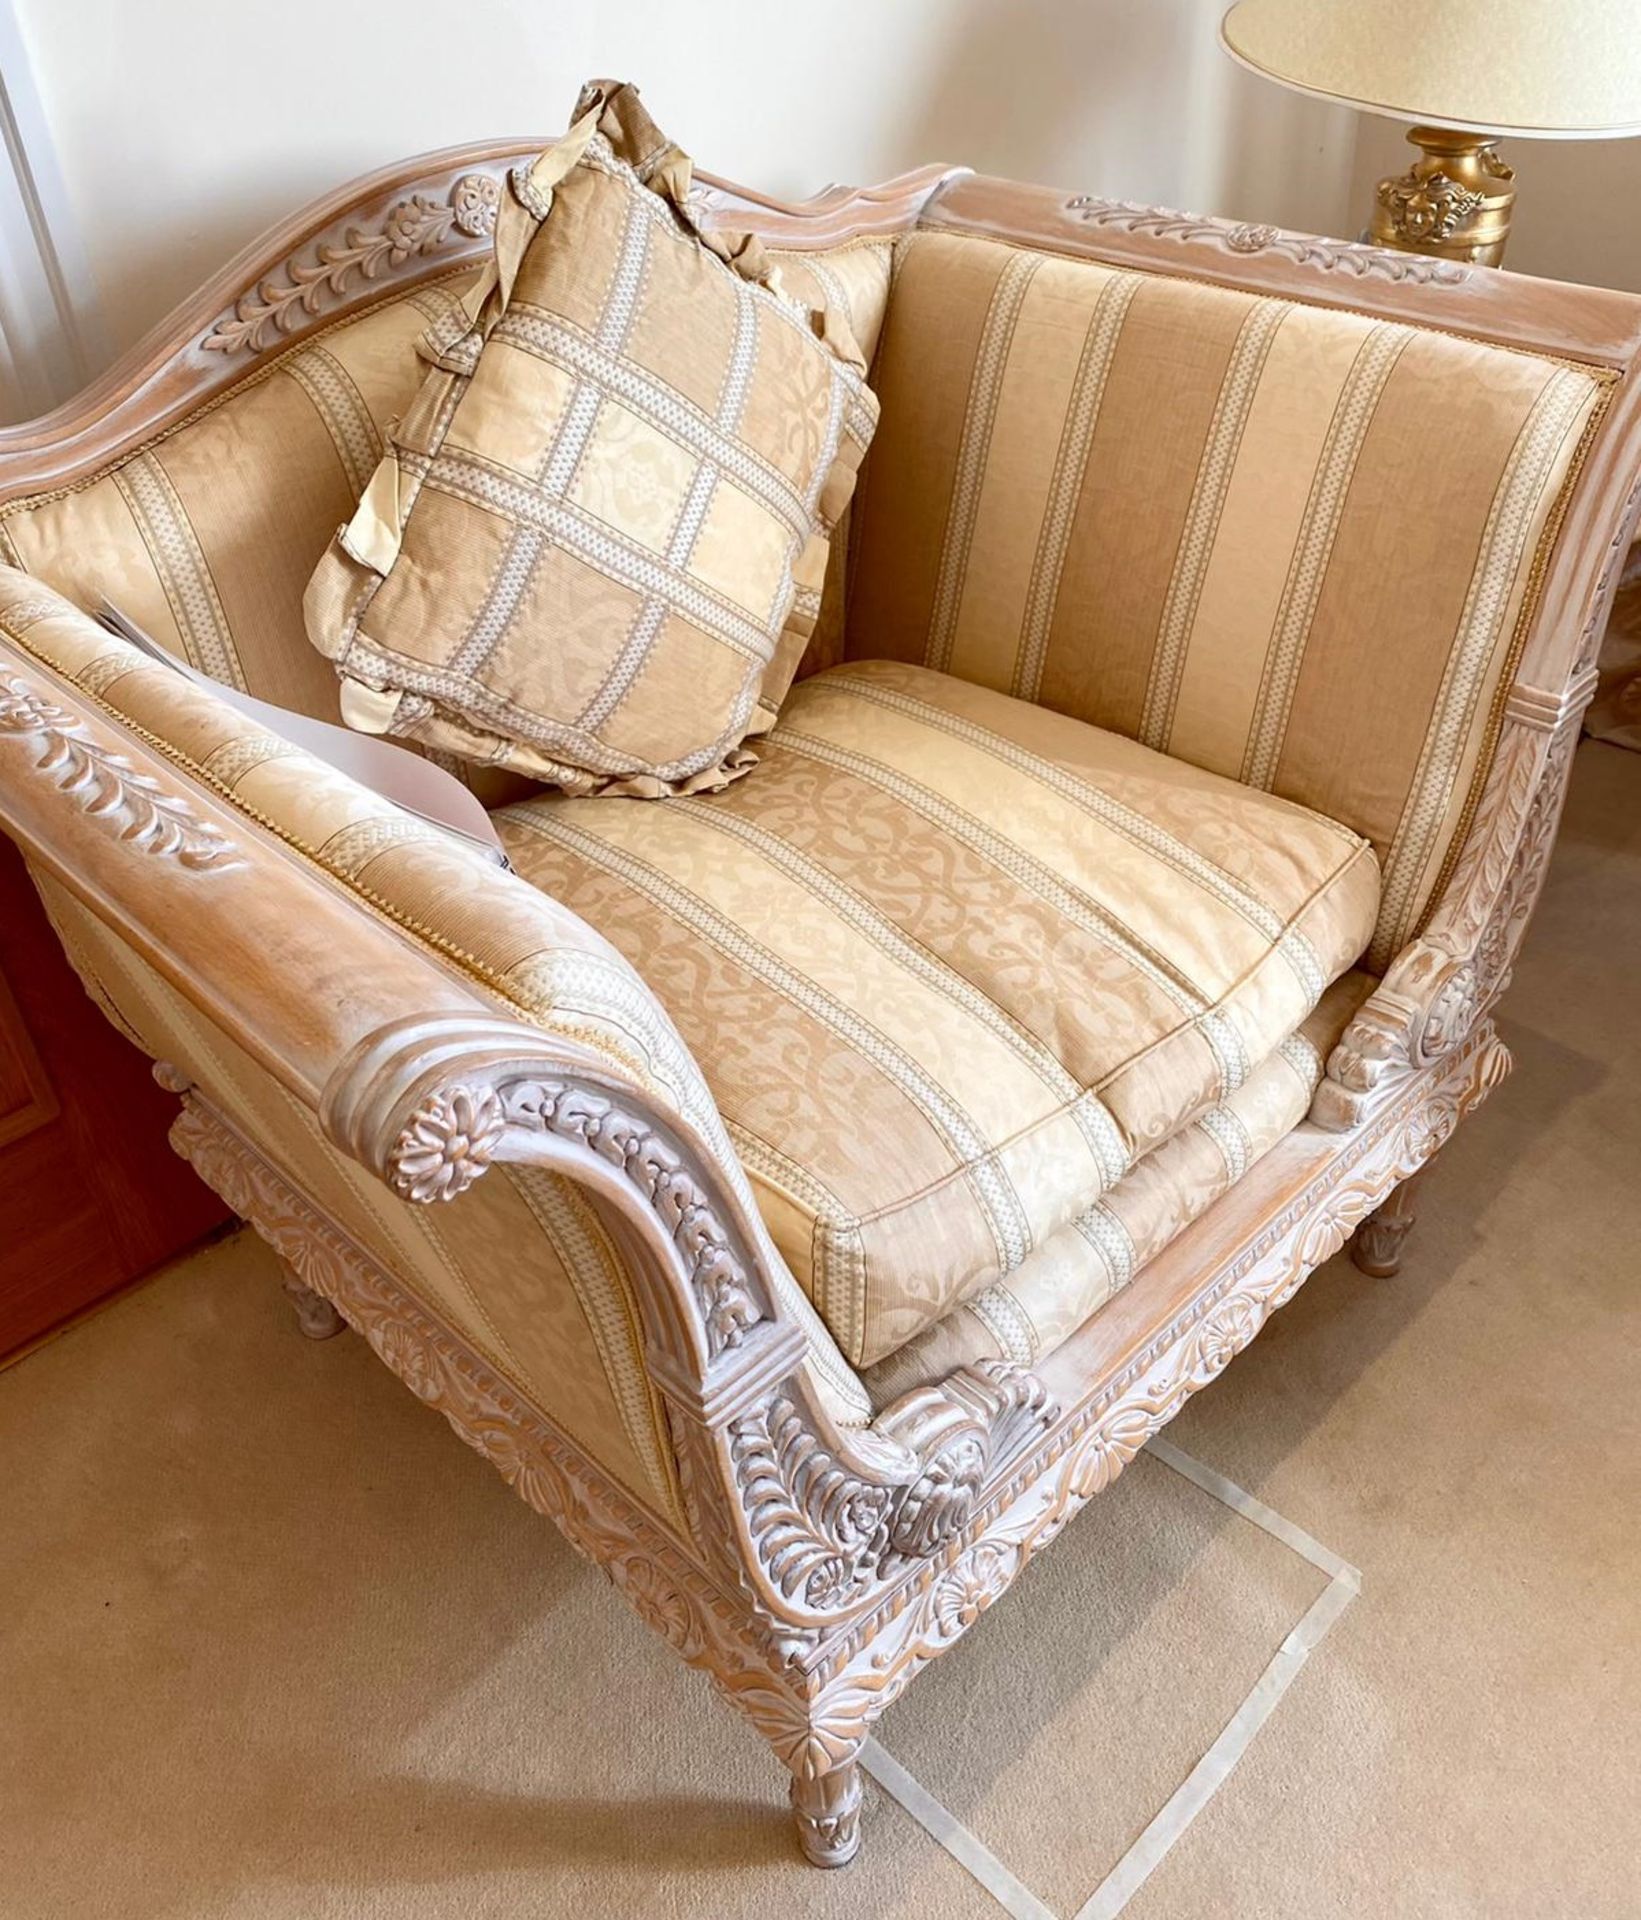 1 x French 19th Century Provincial Style Three Piece Sofa and Chair Set With Beautifully Carved Wood - Image 6 of 41